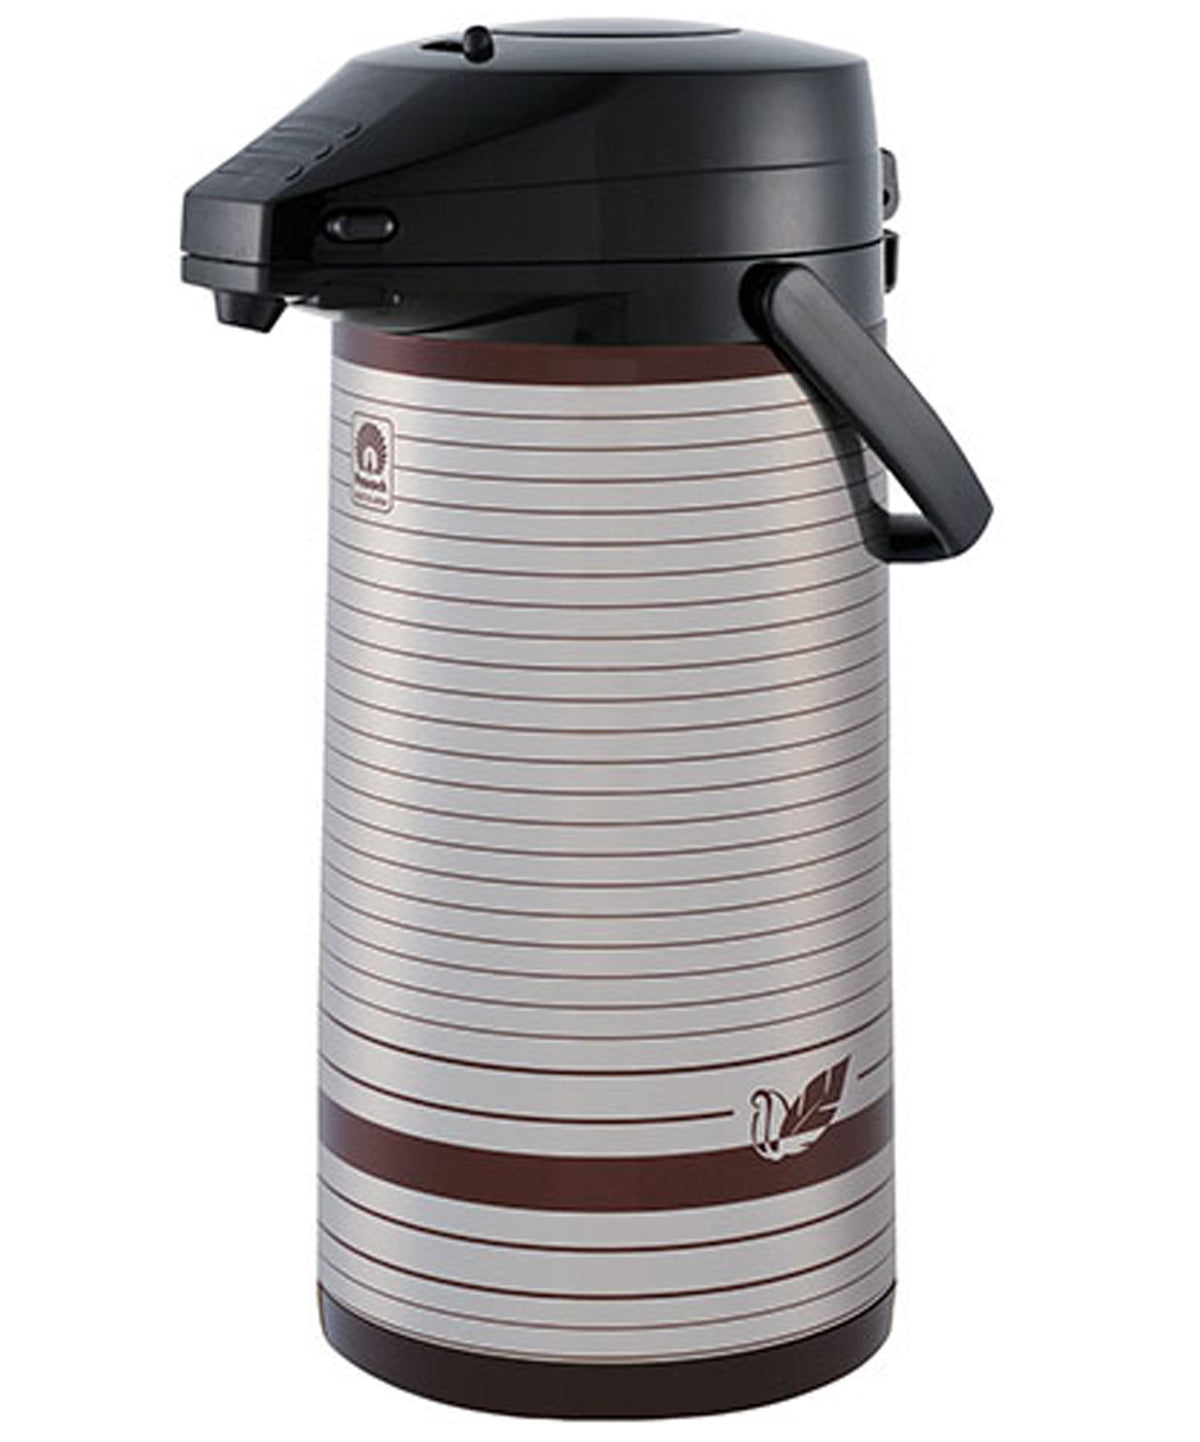 Peacock Stainless Steel Airpot Vacuum Flask 2.5 Litres, FP25